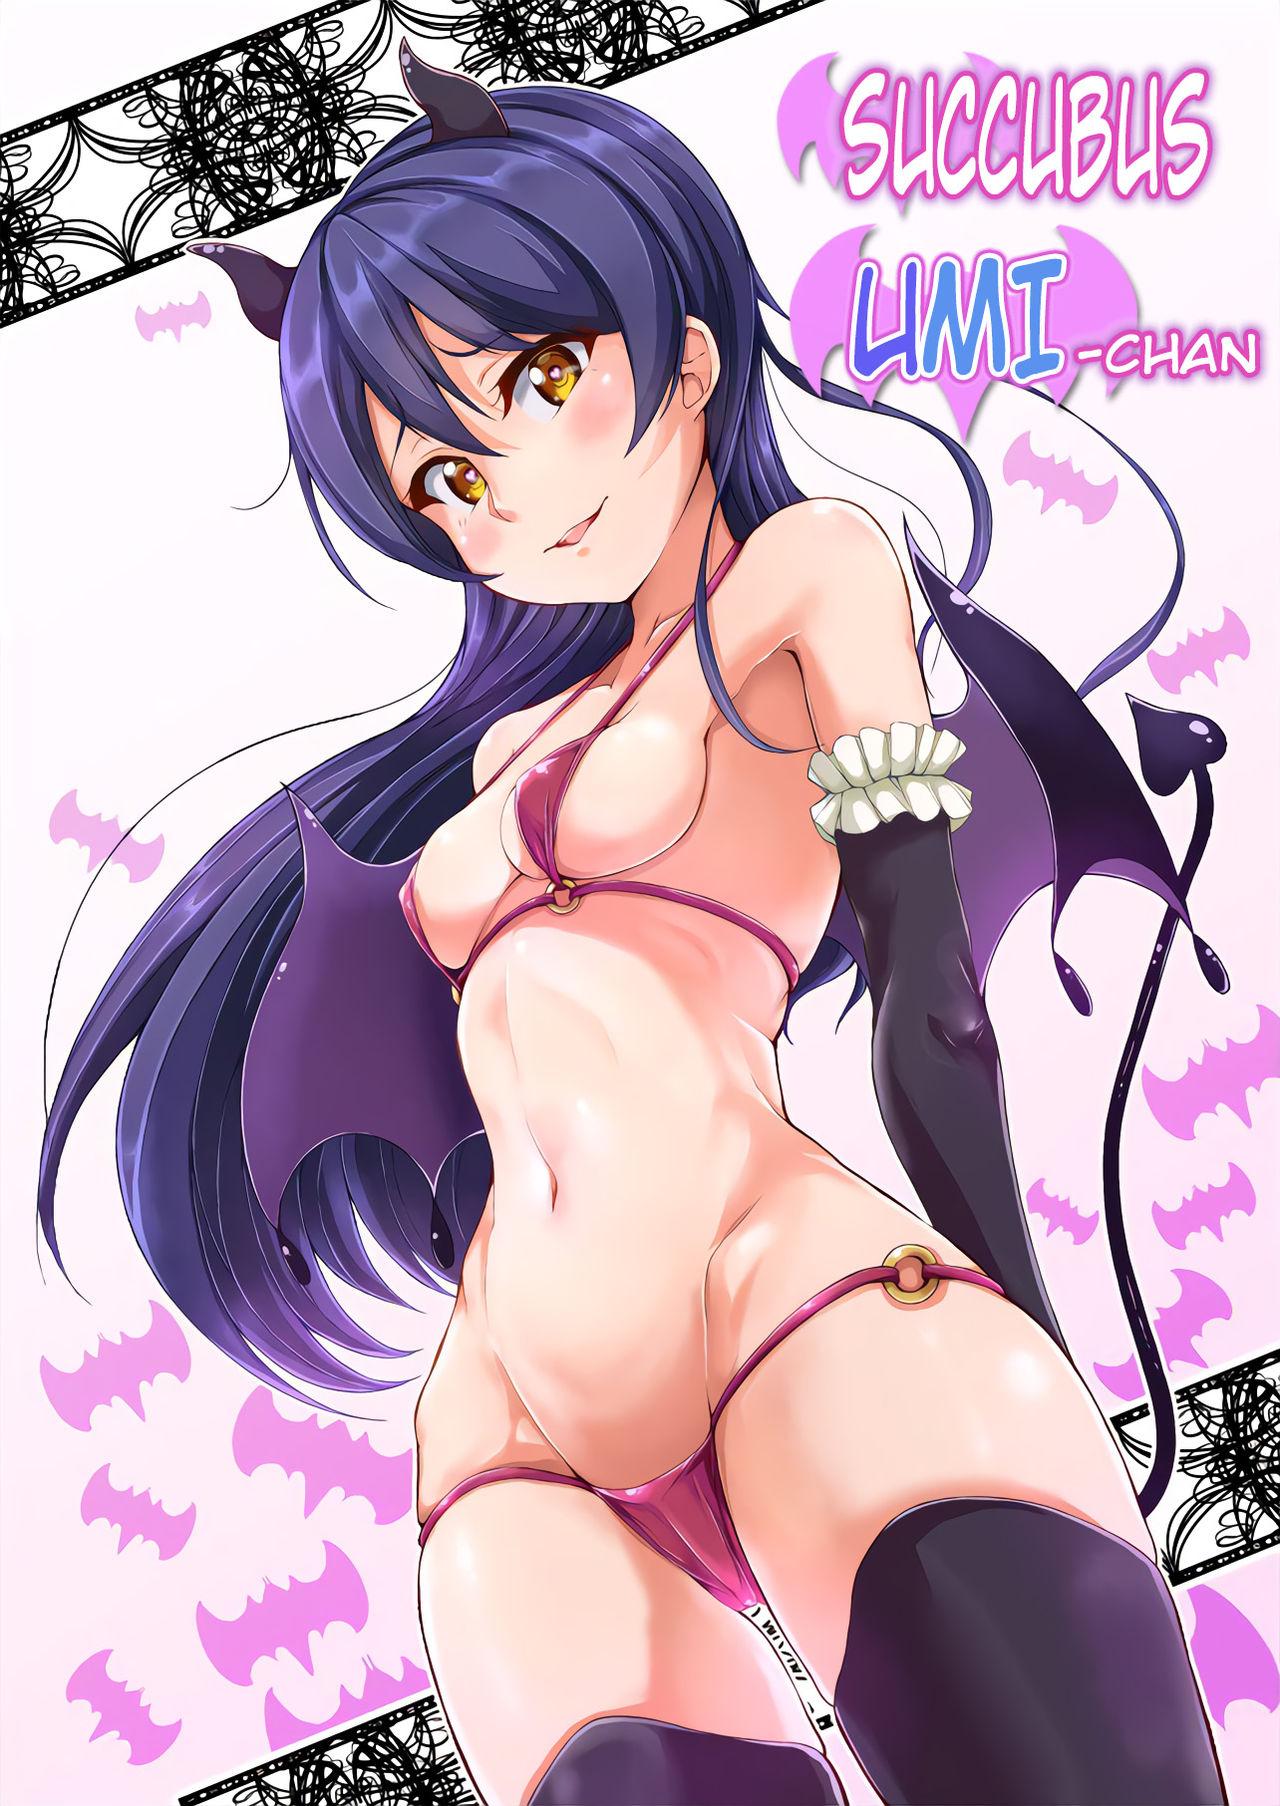 Oldyoung Succubus Umi-chan - Love live Oldman - Picture 1